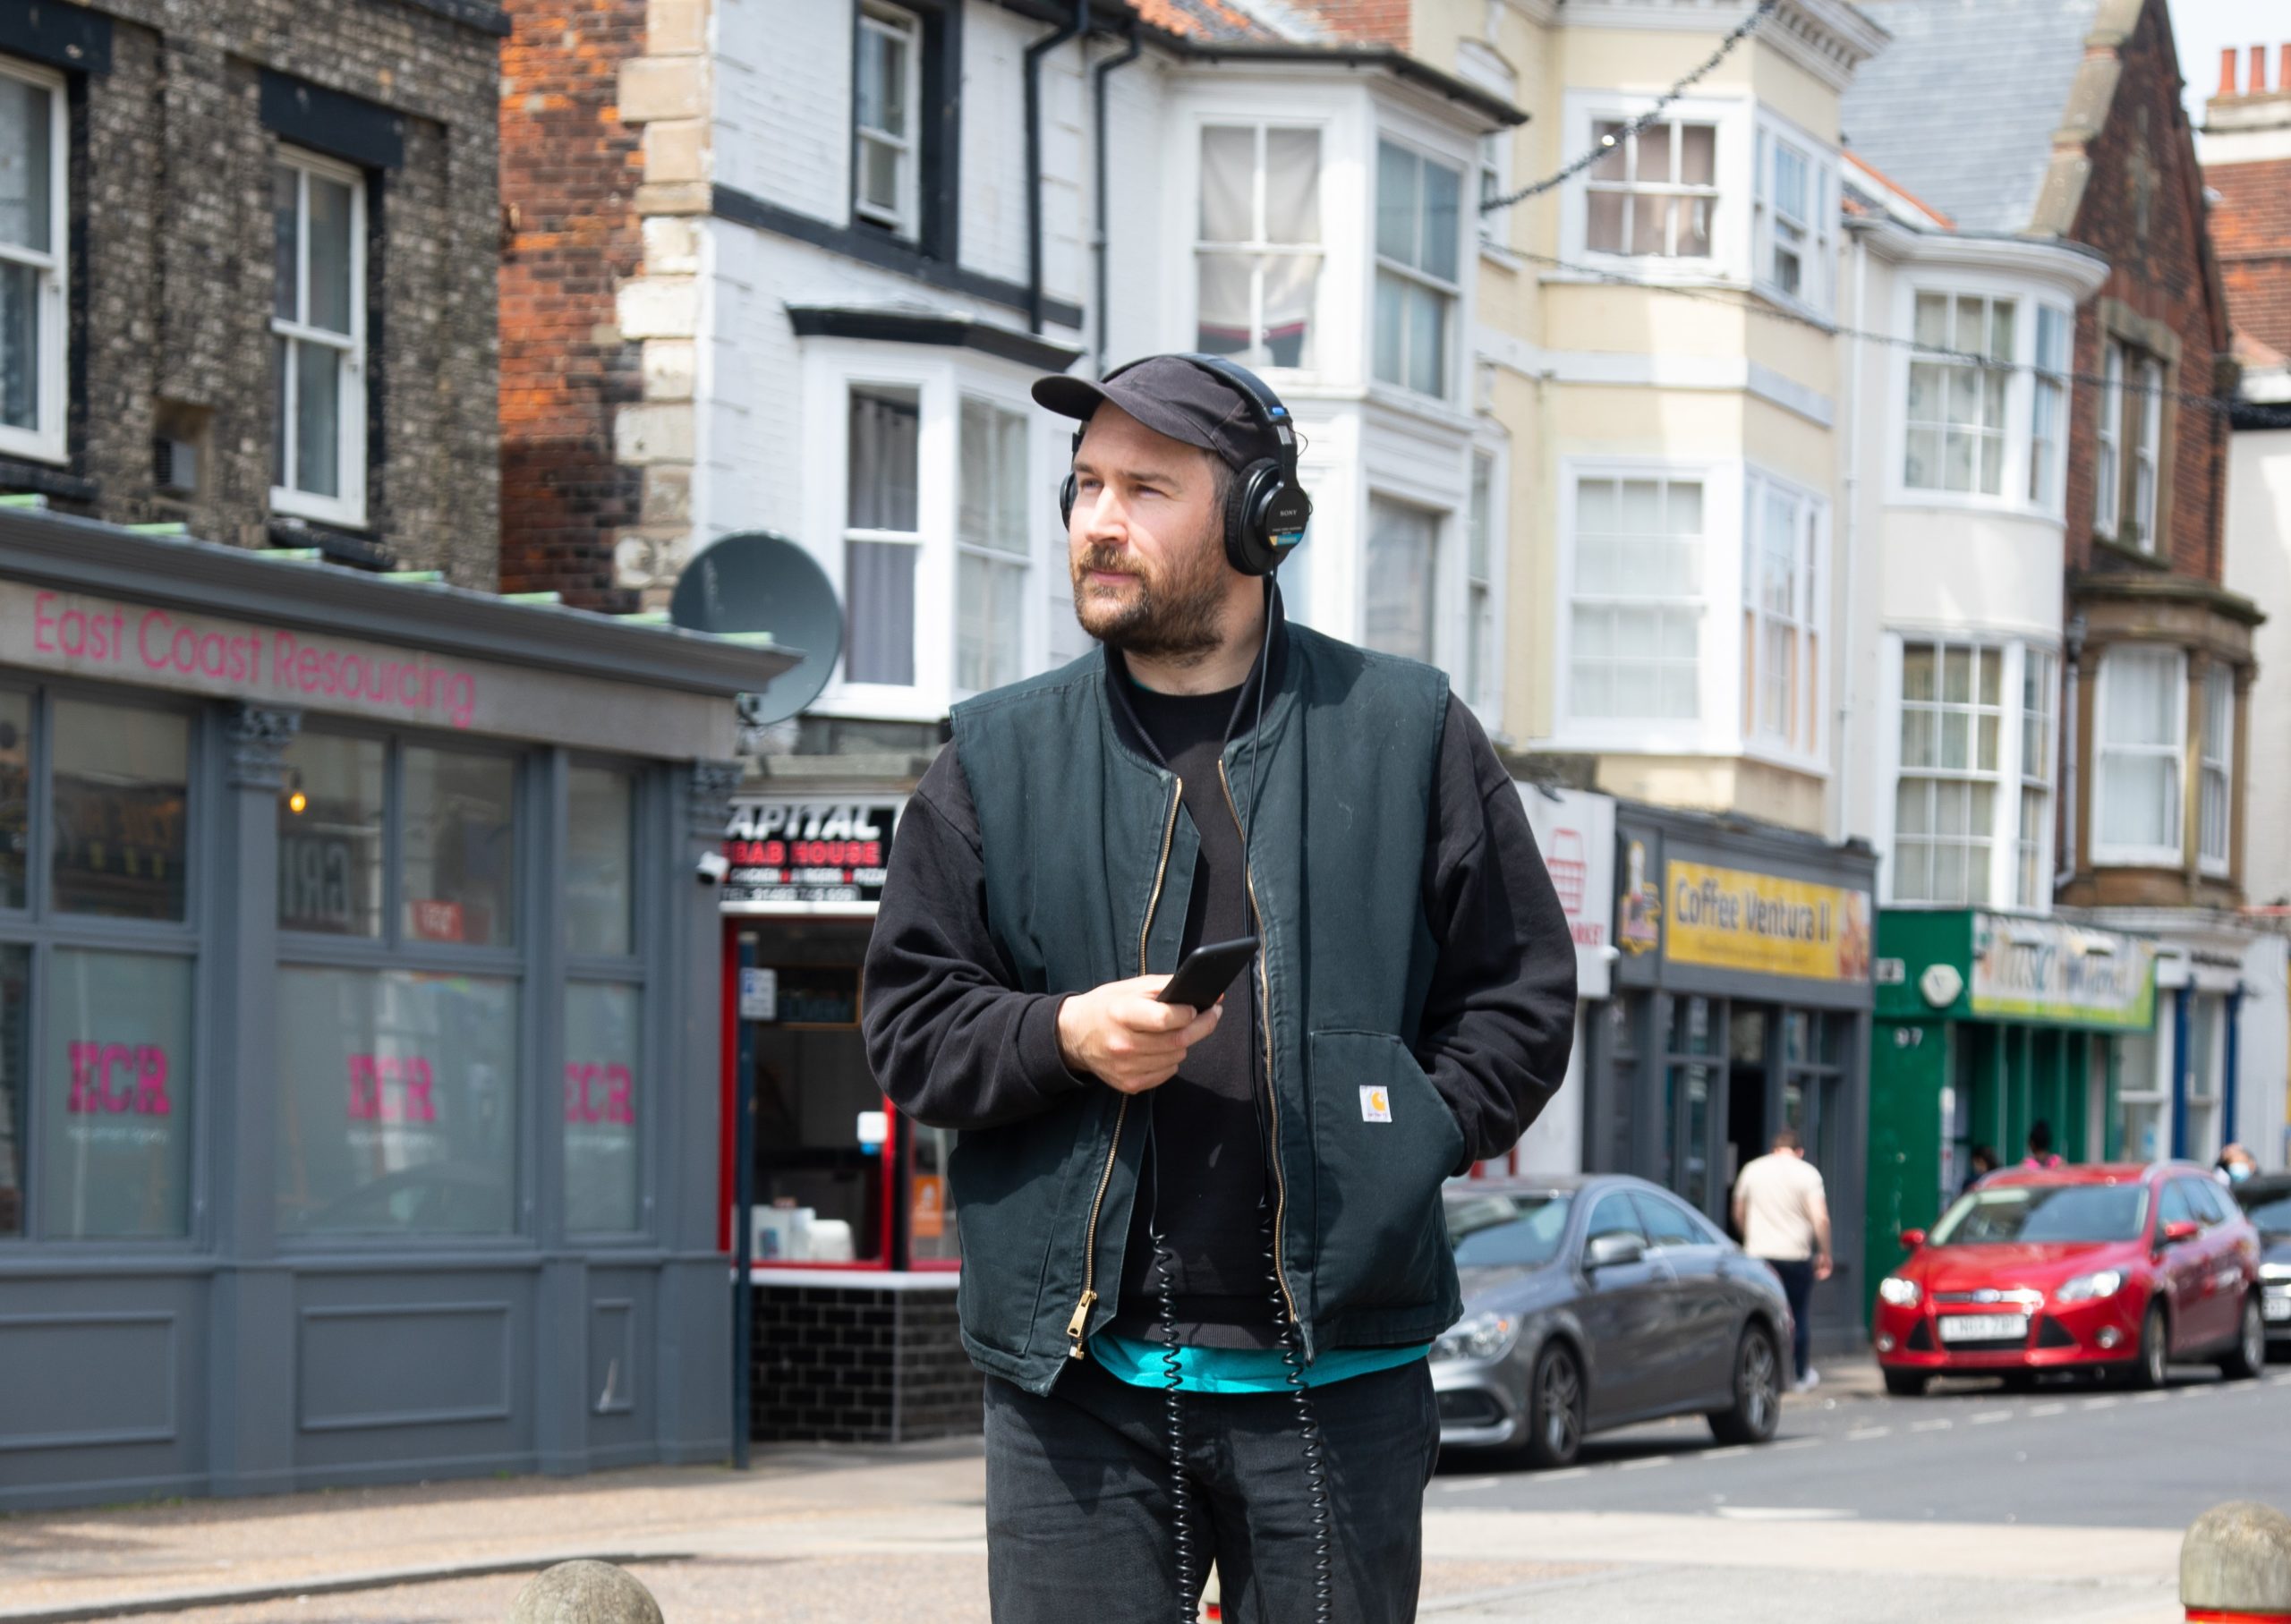 Image of sound artist Oliver Payne walking along Great Yarmouth High Street.